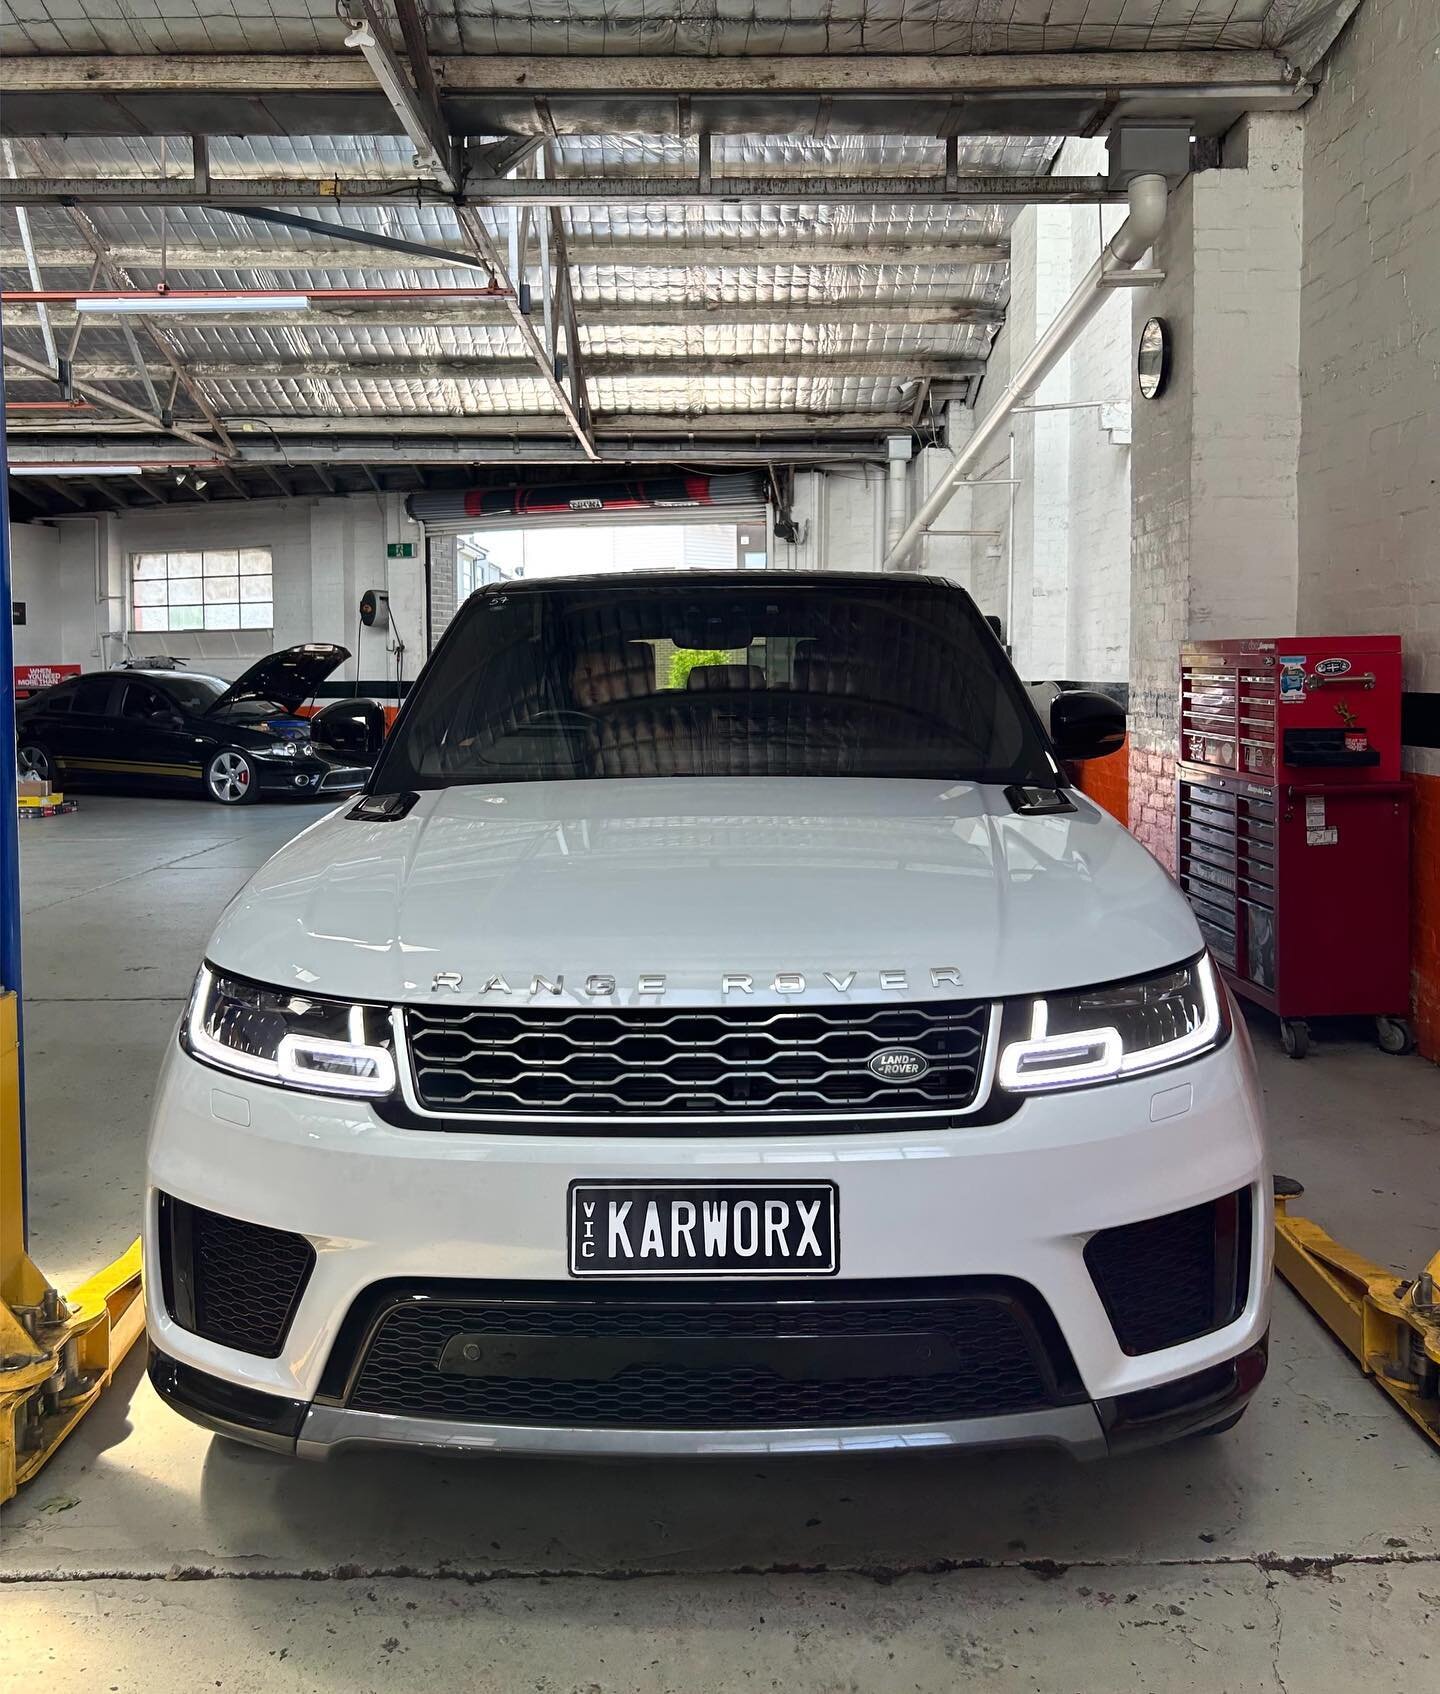 Karworx will be closed over the Easter long weekend. We will re-open Tuesday the 11th April!🐰 Wishing you a happy Easter from The Karworx Team🐣 

Book in your vehicle for a service with our qualified technicians at Karworx! 🧑&zwj;🔧Call us today t